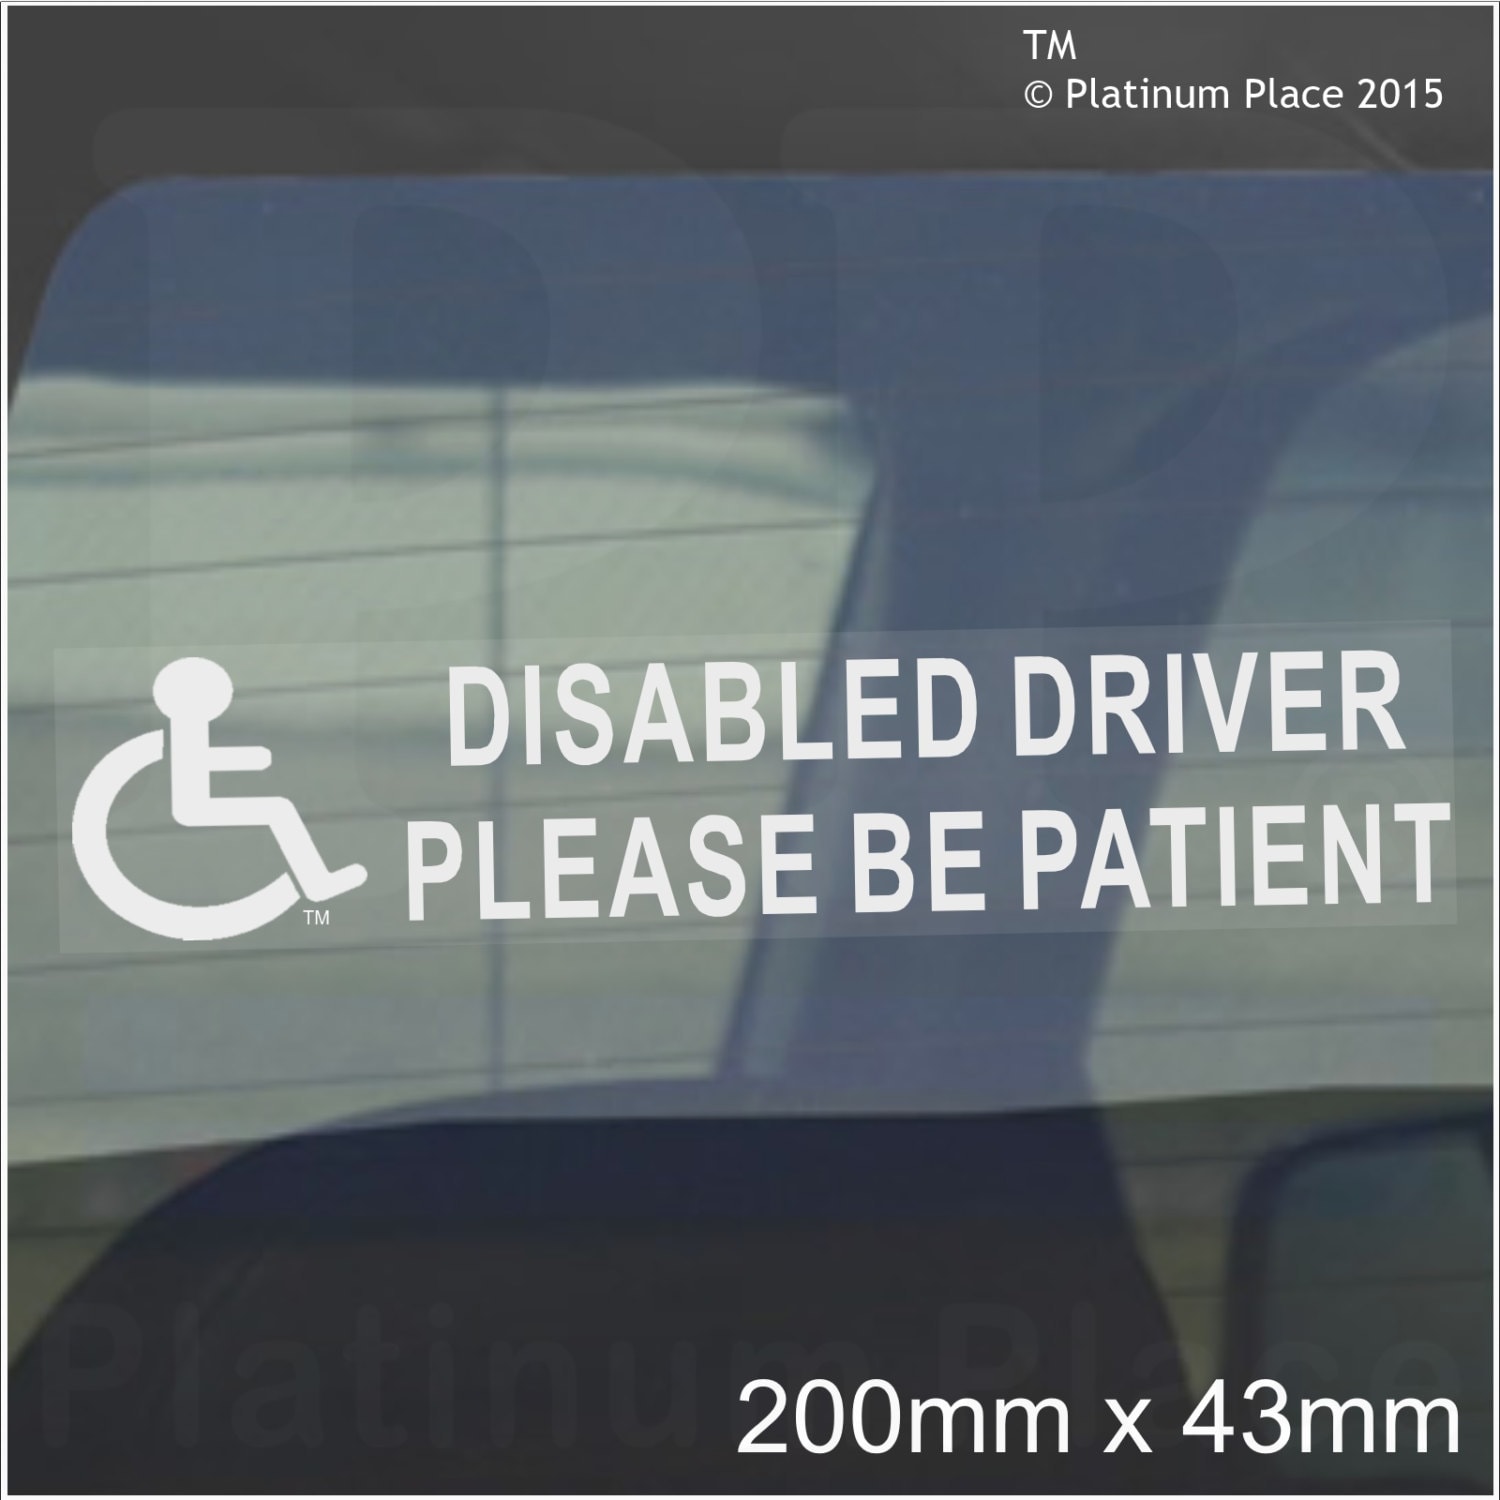 I am Disabled Window Sticker Please be patient if making delivery Sign 